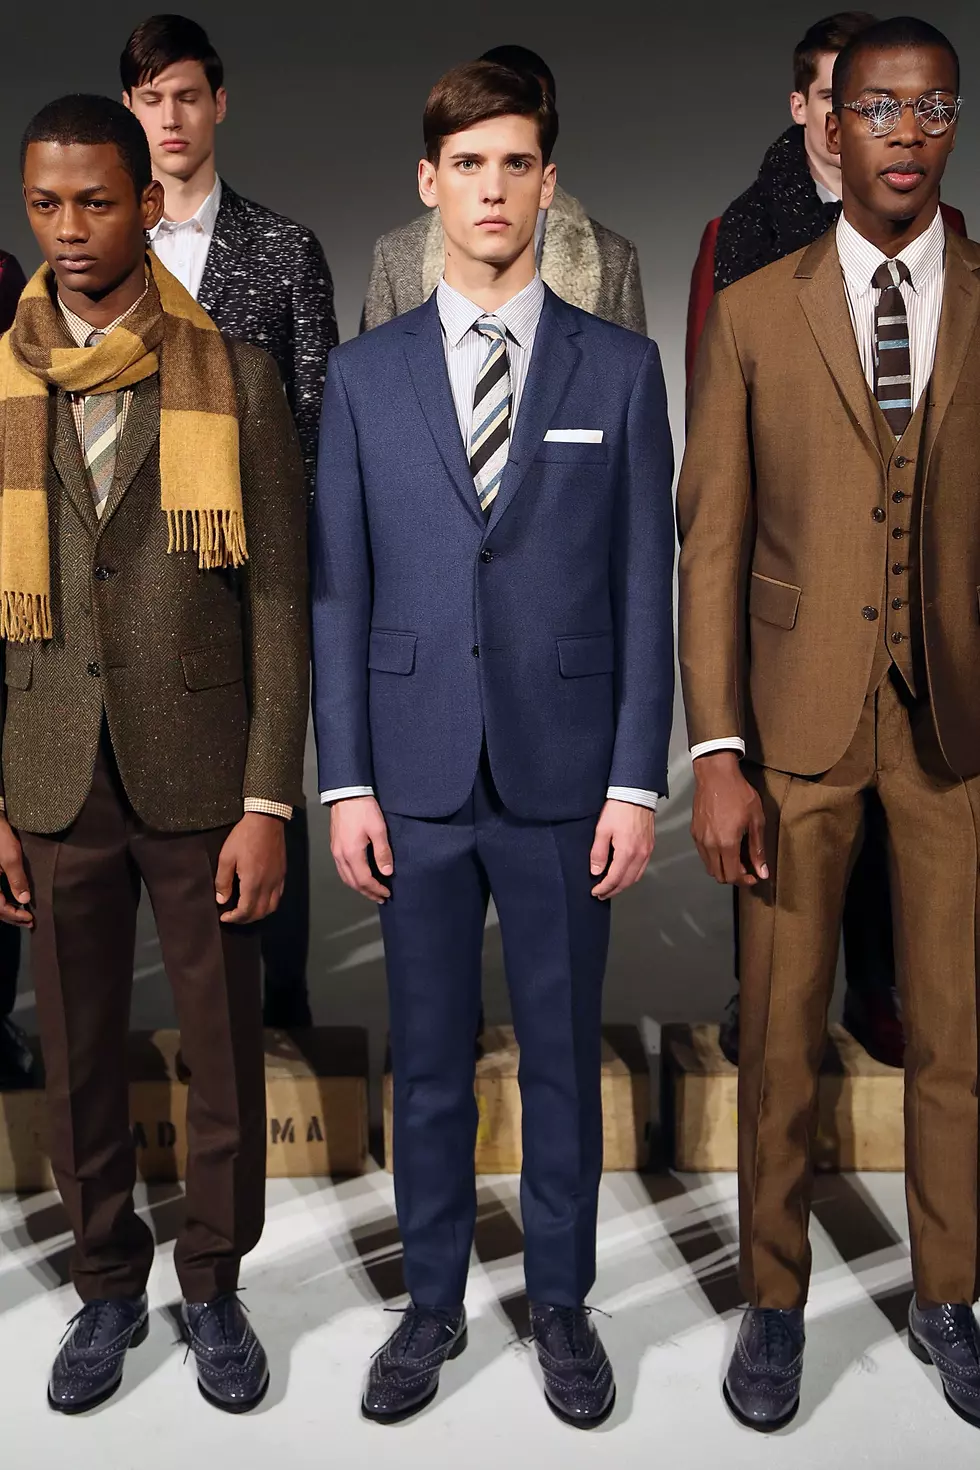 Free Beer & Hot Wings: Seven Things Every Guy Should Know About Buying Suits [Video]